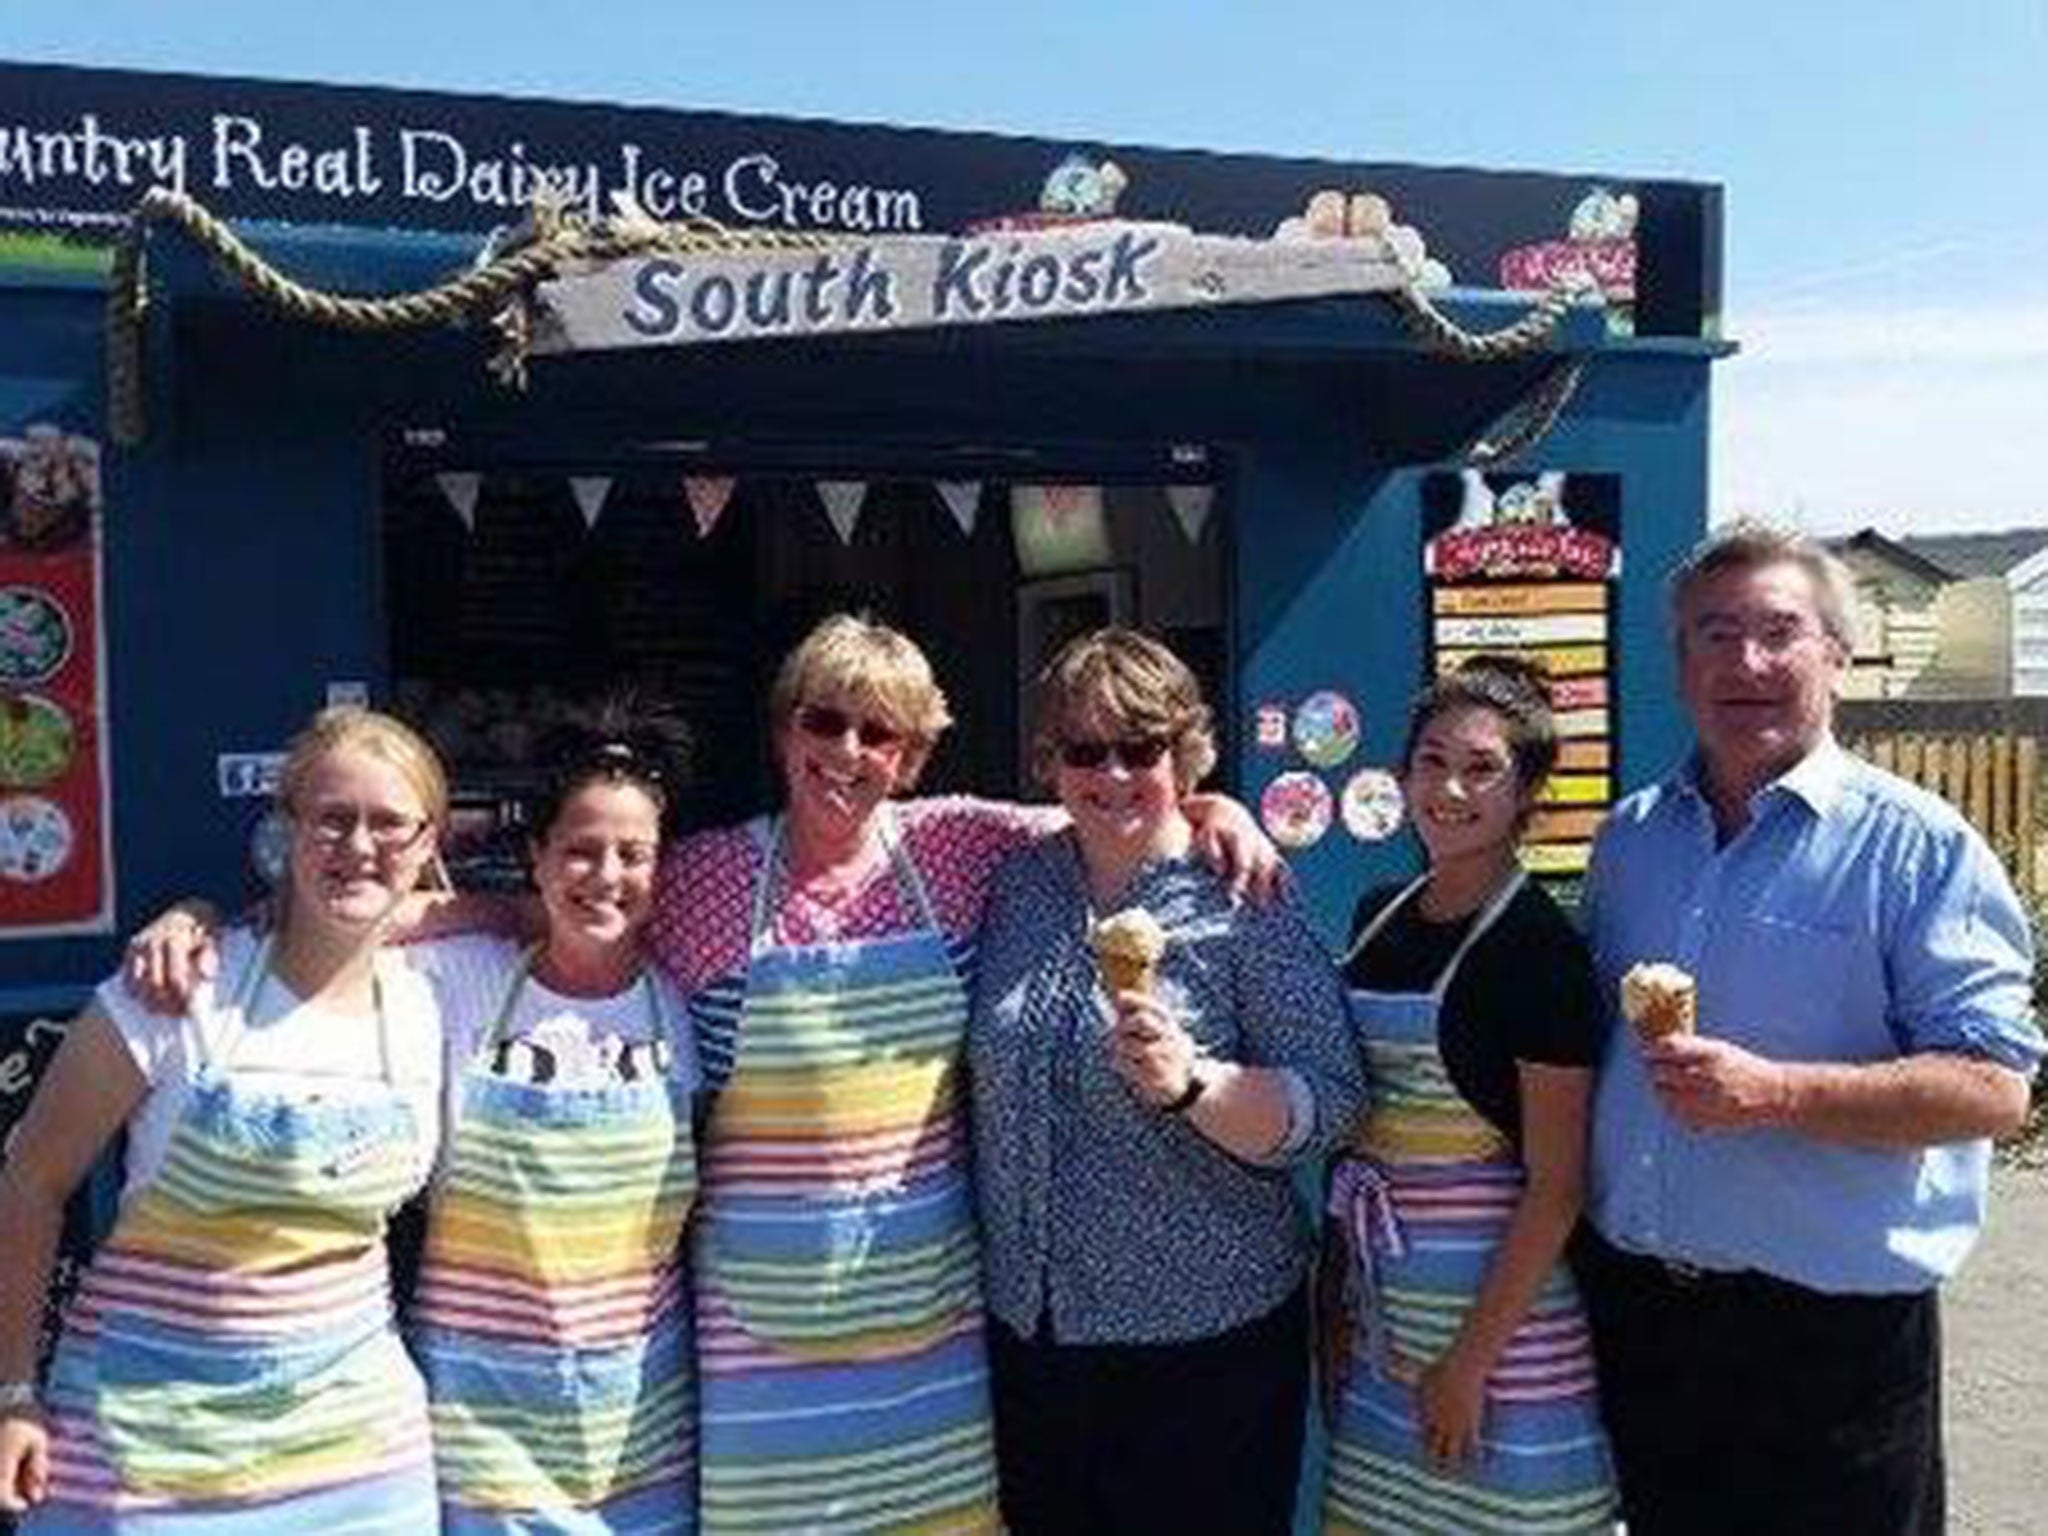 The South Kiosk cafe, which owner Kim Christofi says has been inundated with support